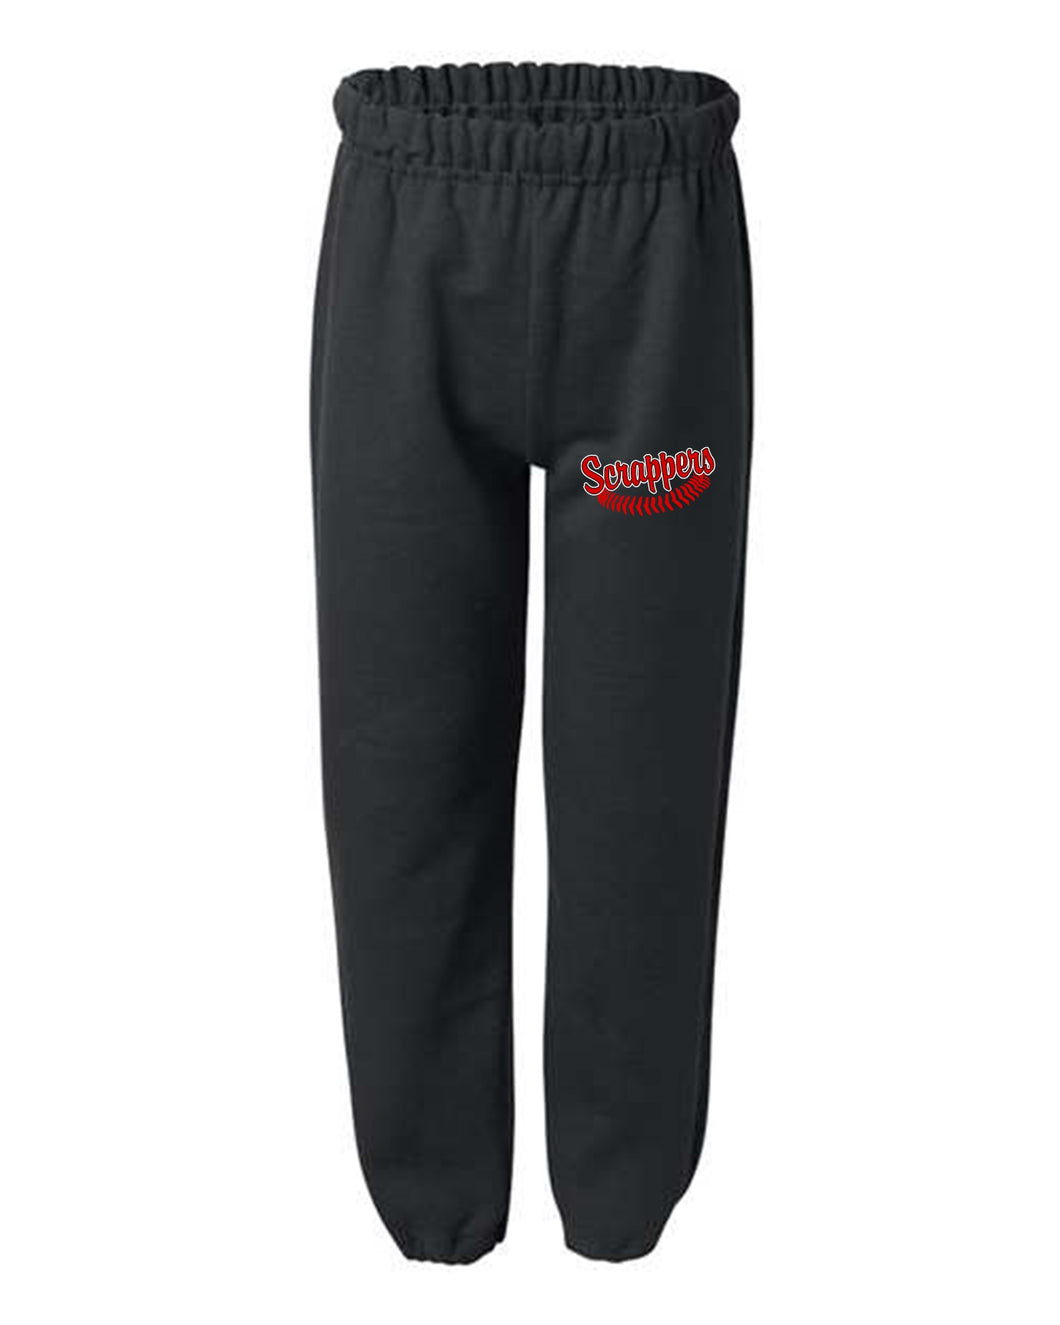 Scrappers Baseball Sweatpants (Adult and Youth)